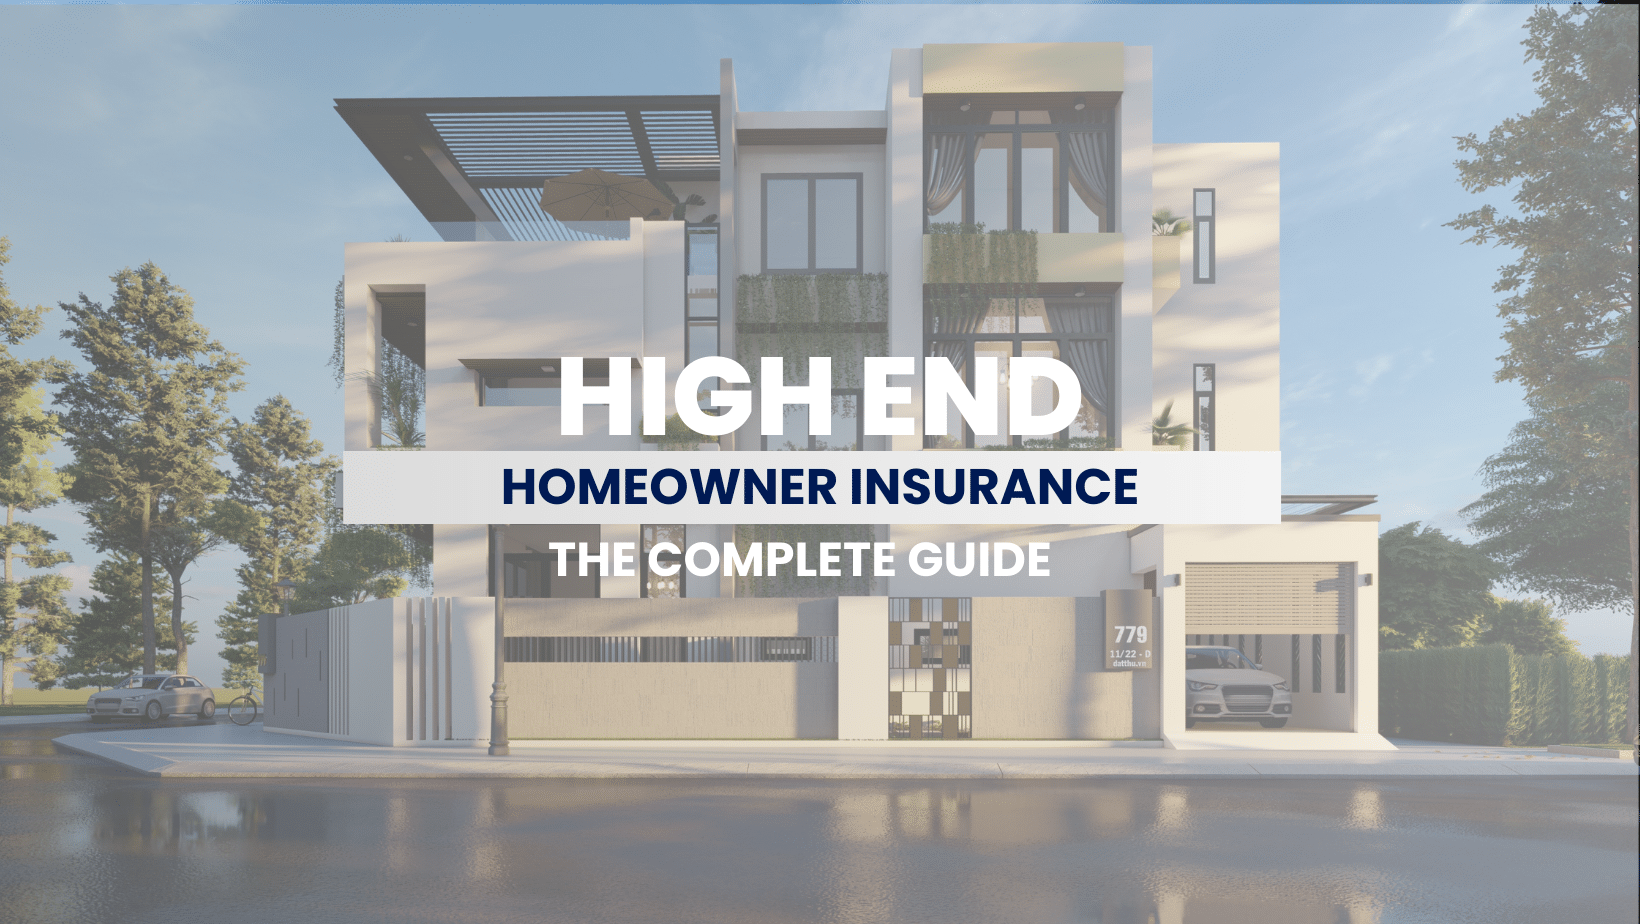 An opulent residence featuring state-of-the-art architecture and surrounded by a pristine garden, representing the type of high value homes covered by high end home insurance. Accompanying text highlights the benefits of comprehensive, customized insurance plans for luxury properties.